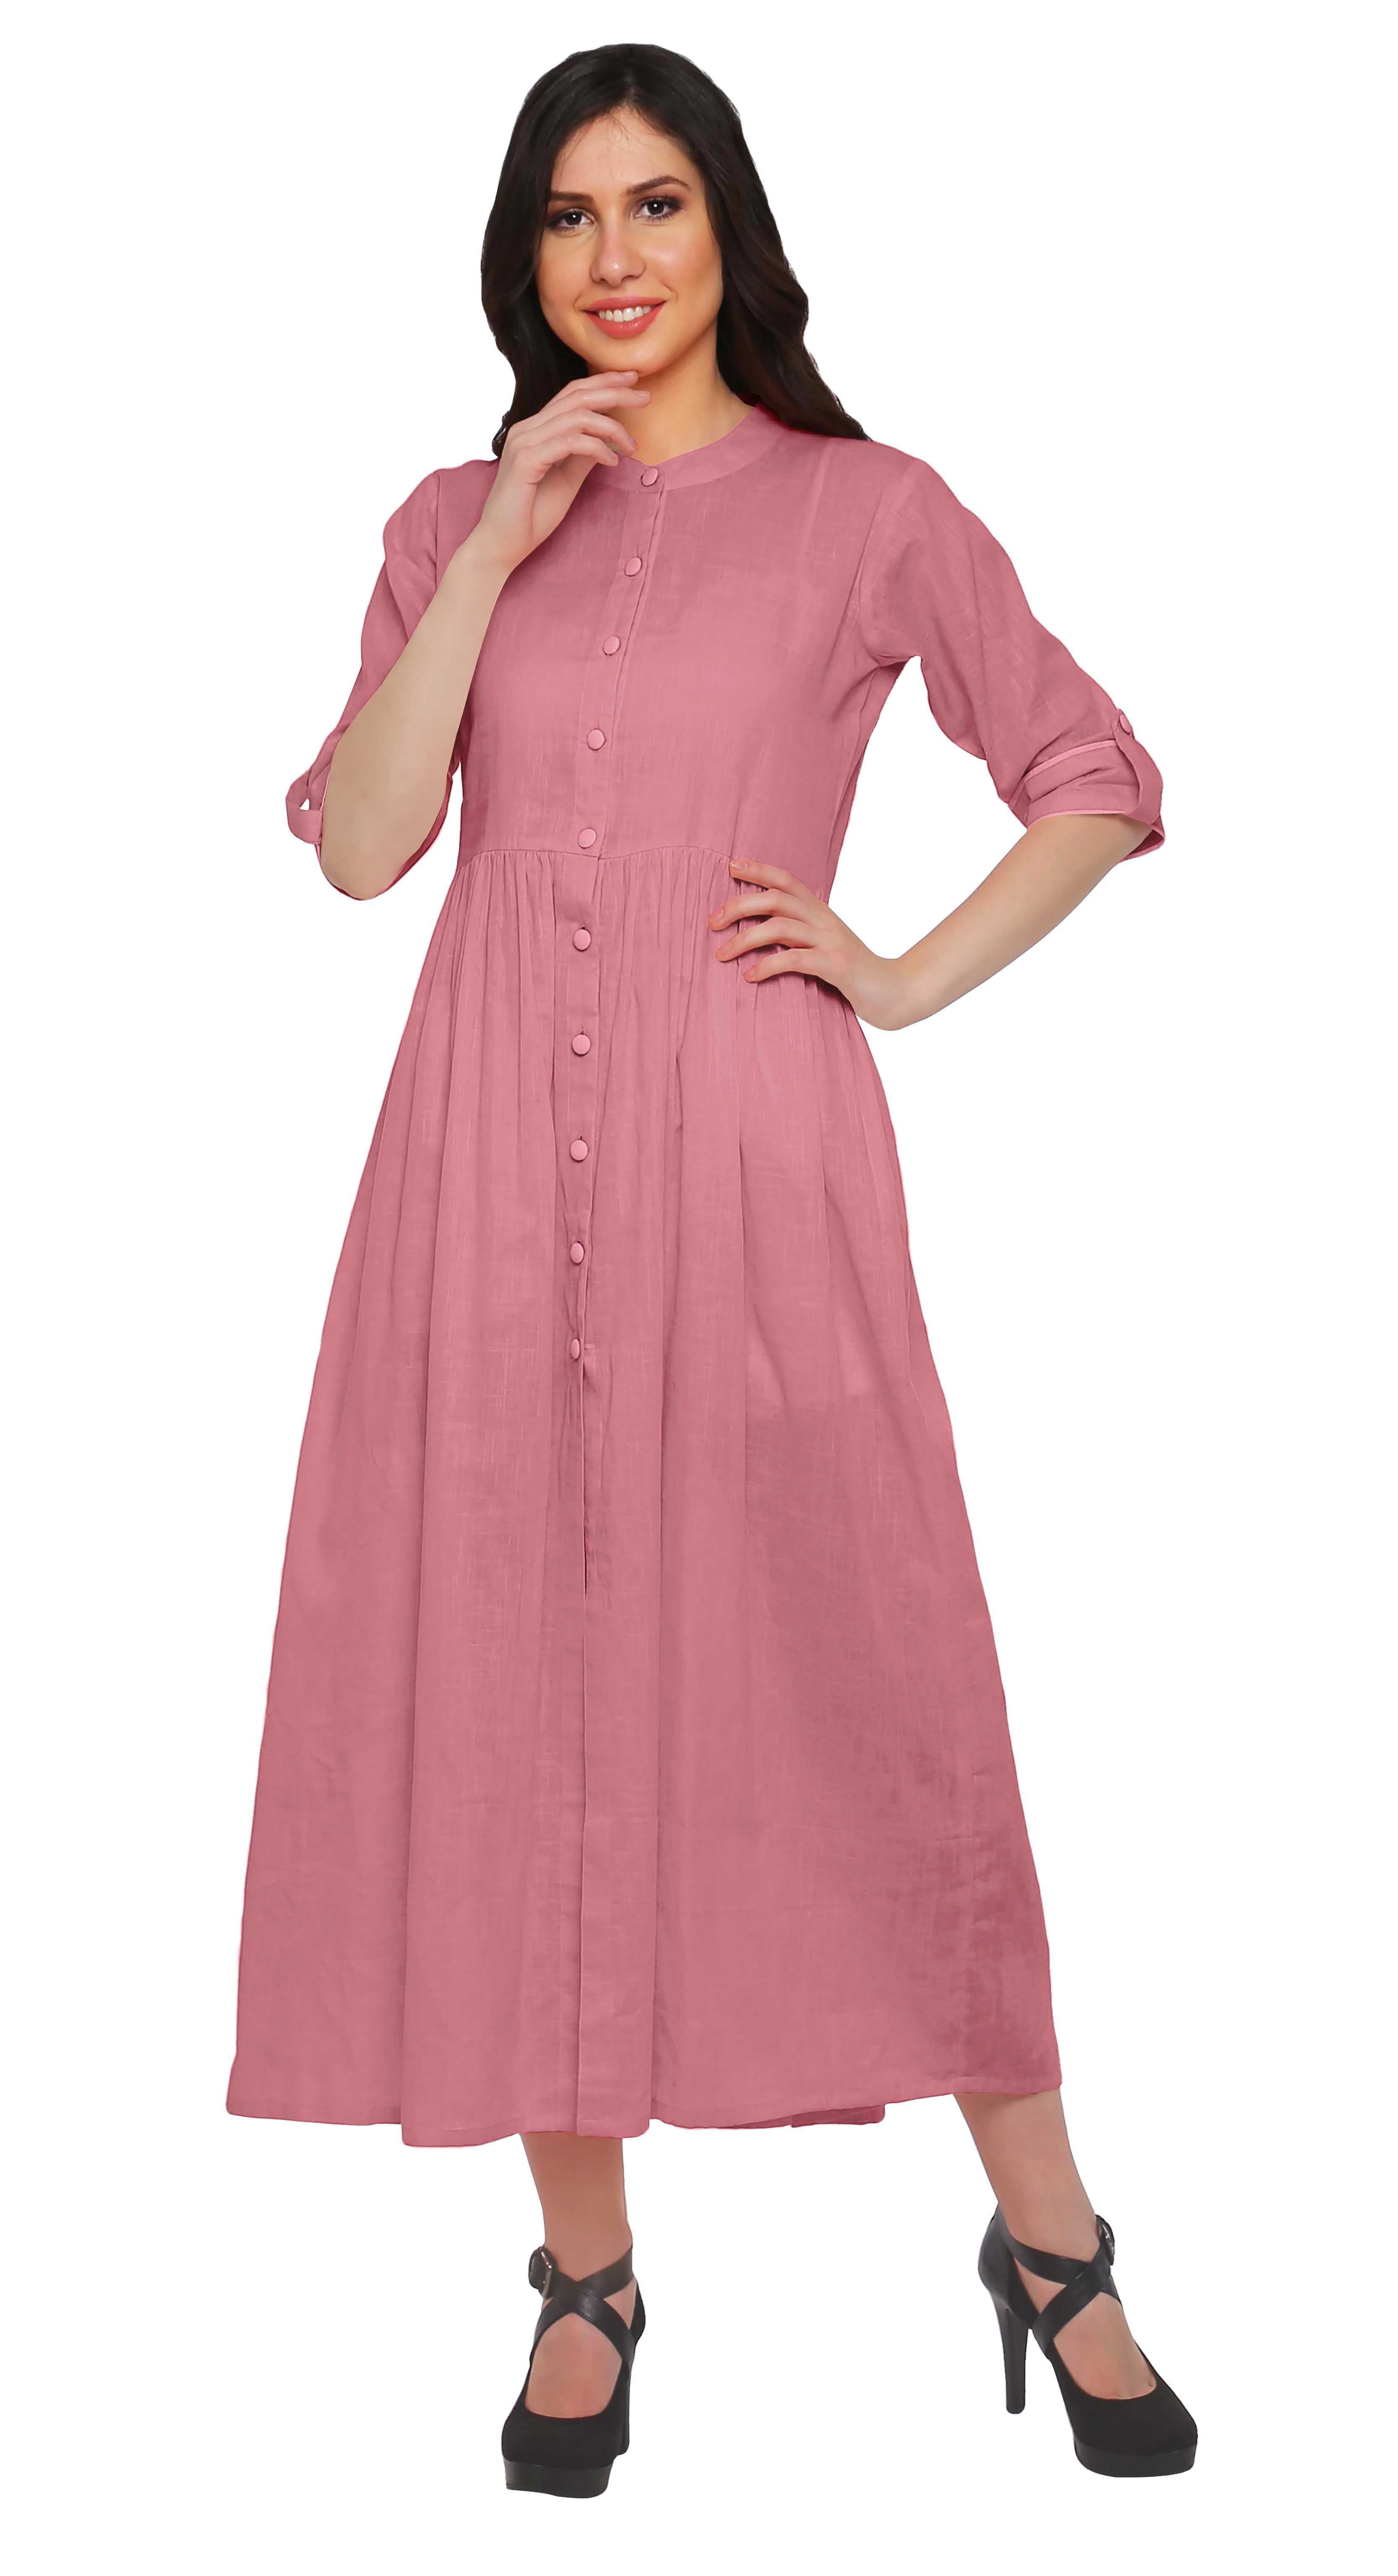 Buy Sreejaa Cotton Printed Aline Kurta with Show Button & Mobile Pocket for  Girls Pink-S at Amazon.in